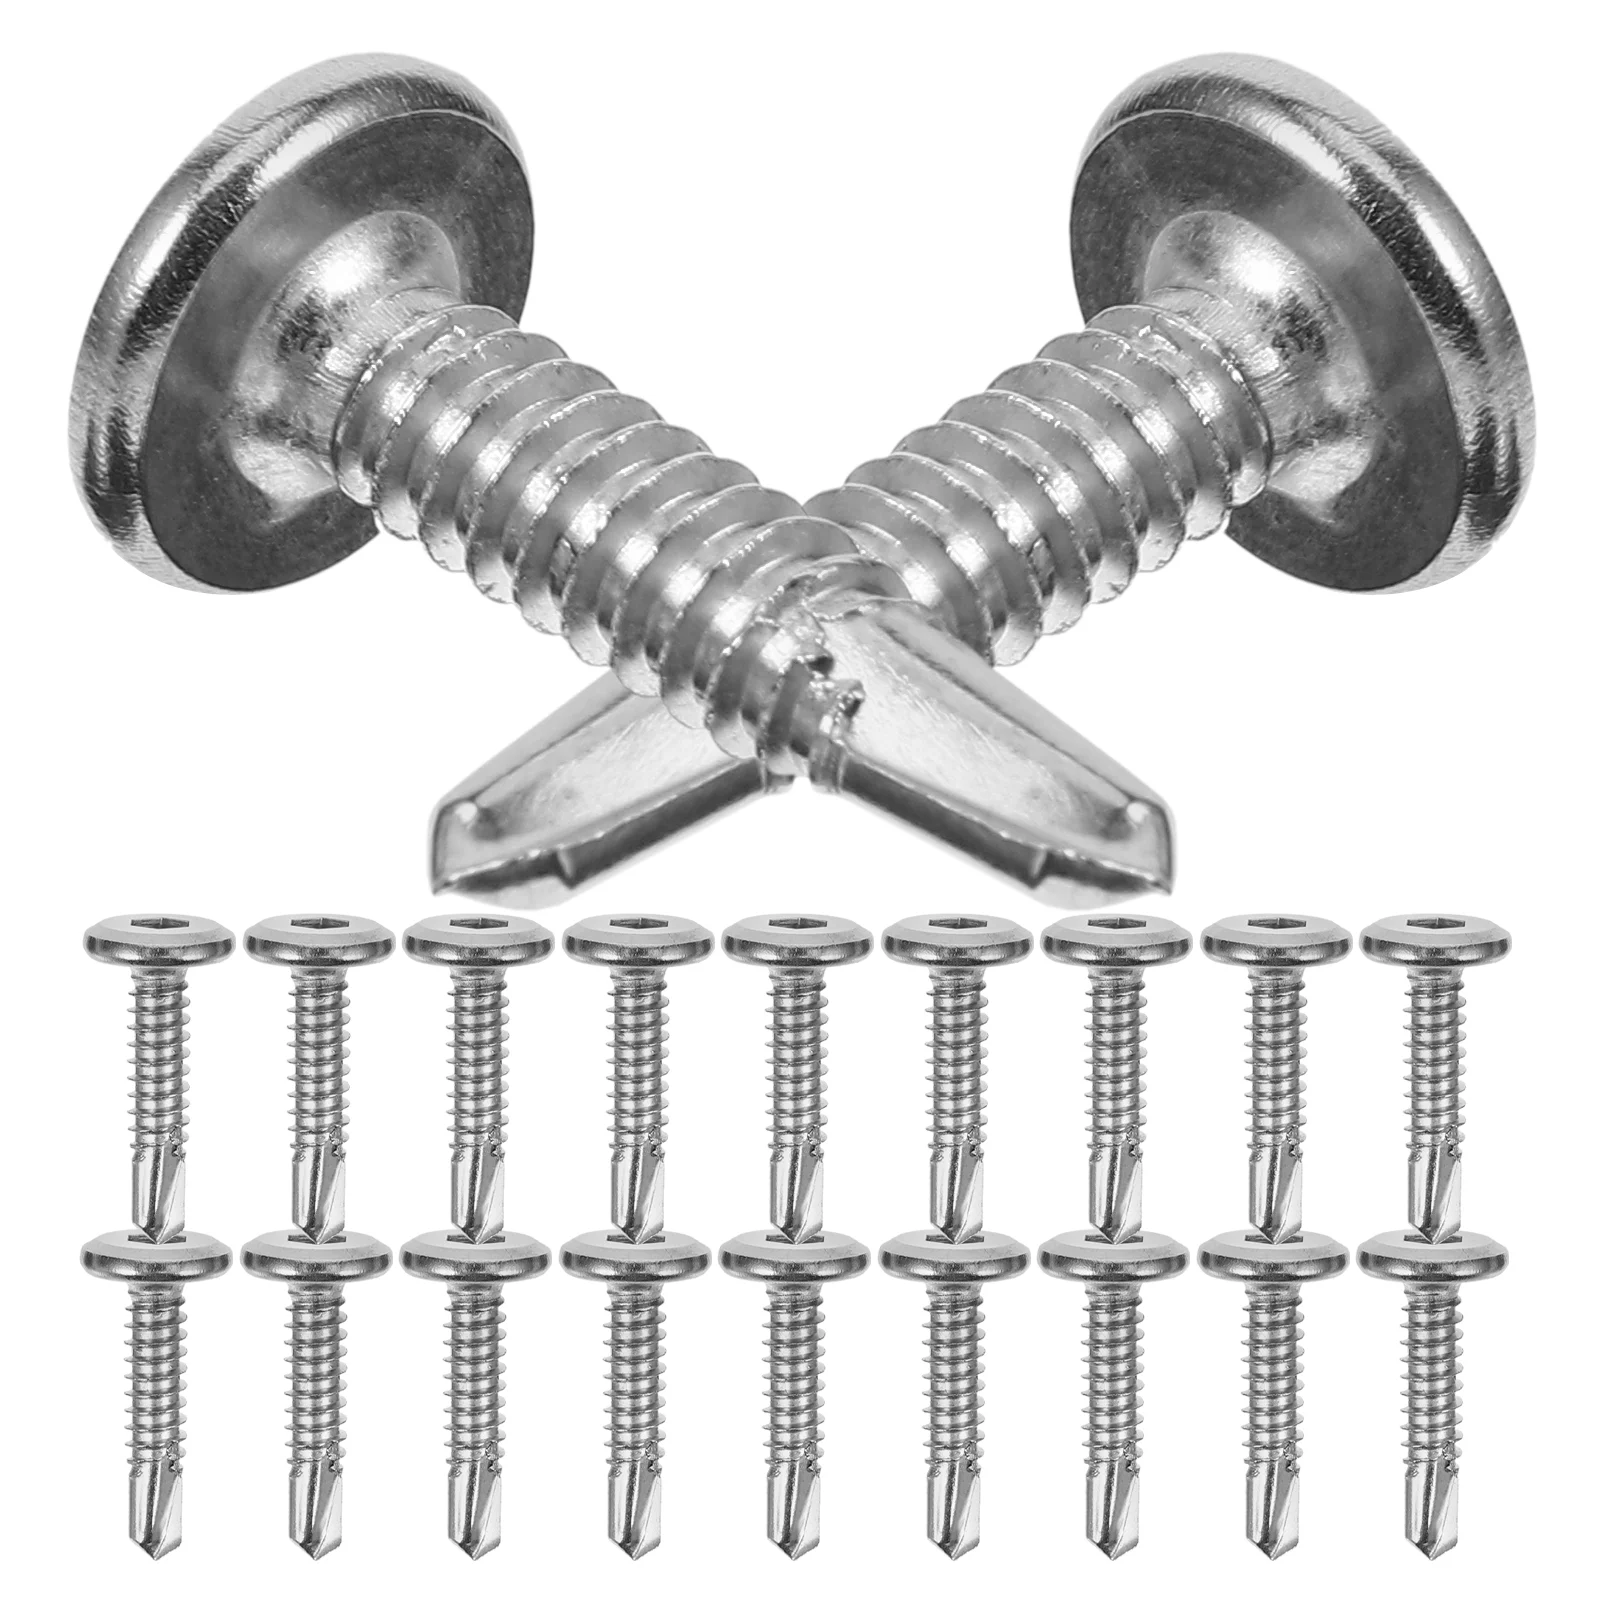 20 Pcs Guardrail Screws Metal Hardware Hardwares for Gate Stainless Steel Home Fencing Mounted